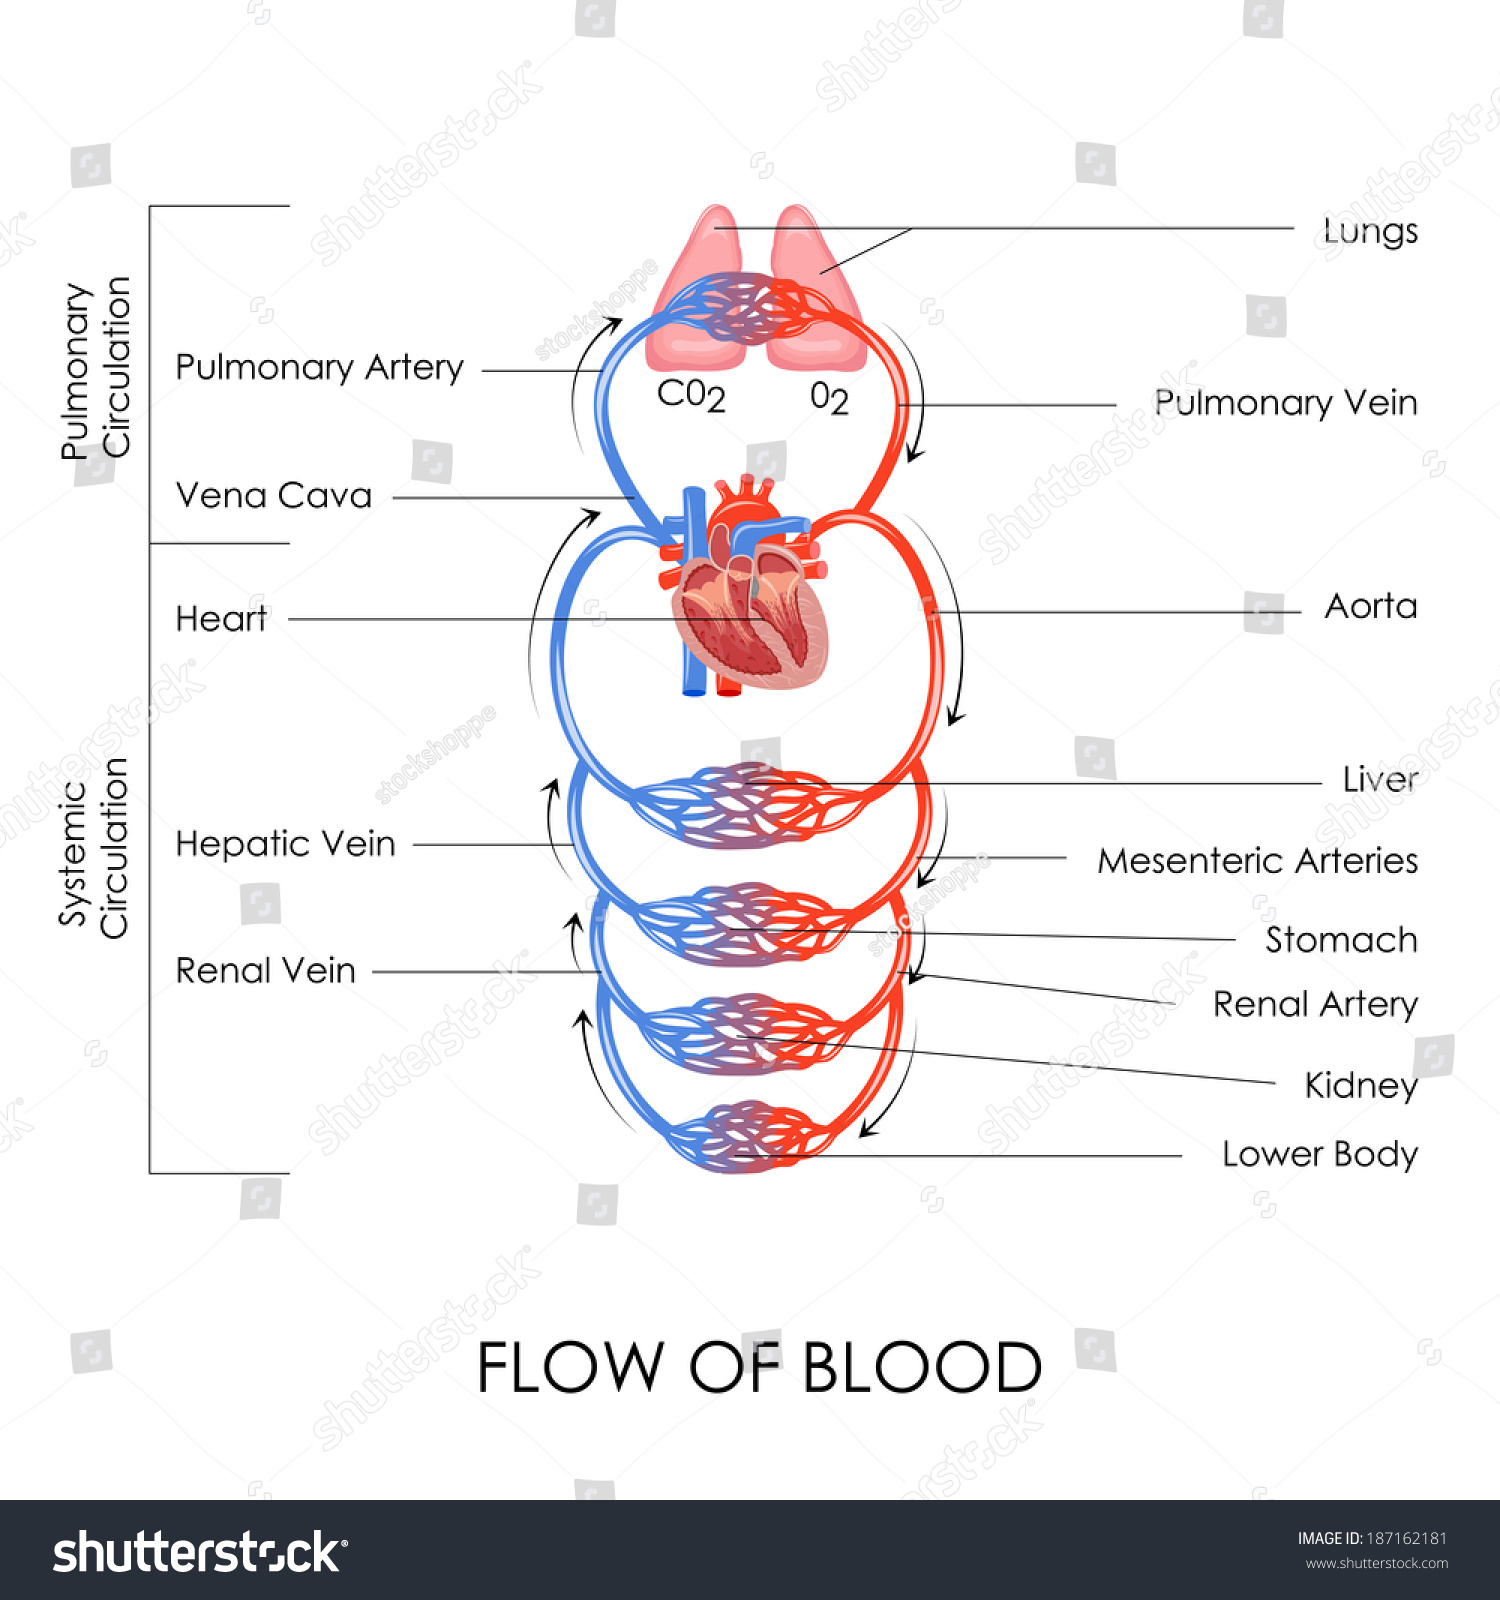 Vector Illustration Of Flow Of Blood In Circulatory System - 187162181 ...